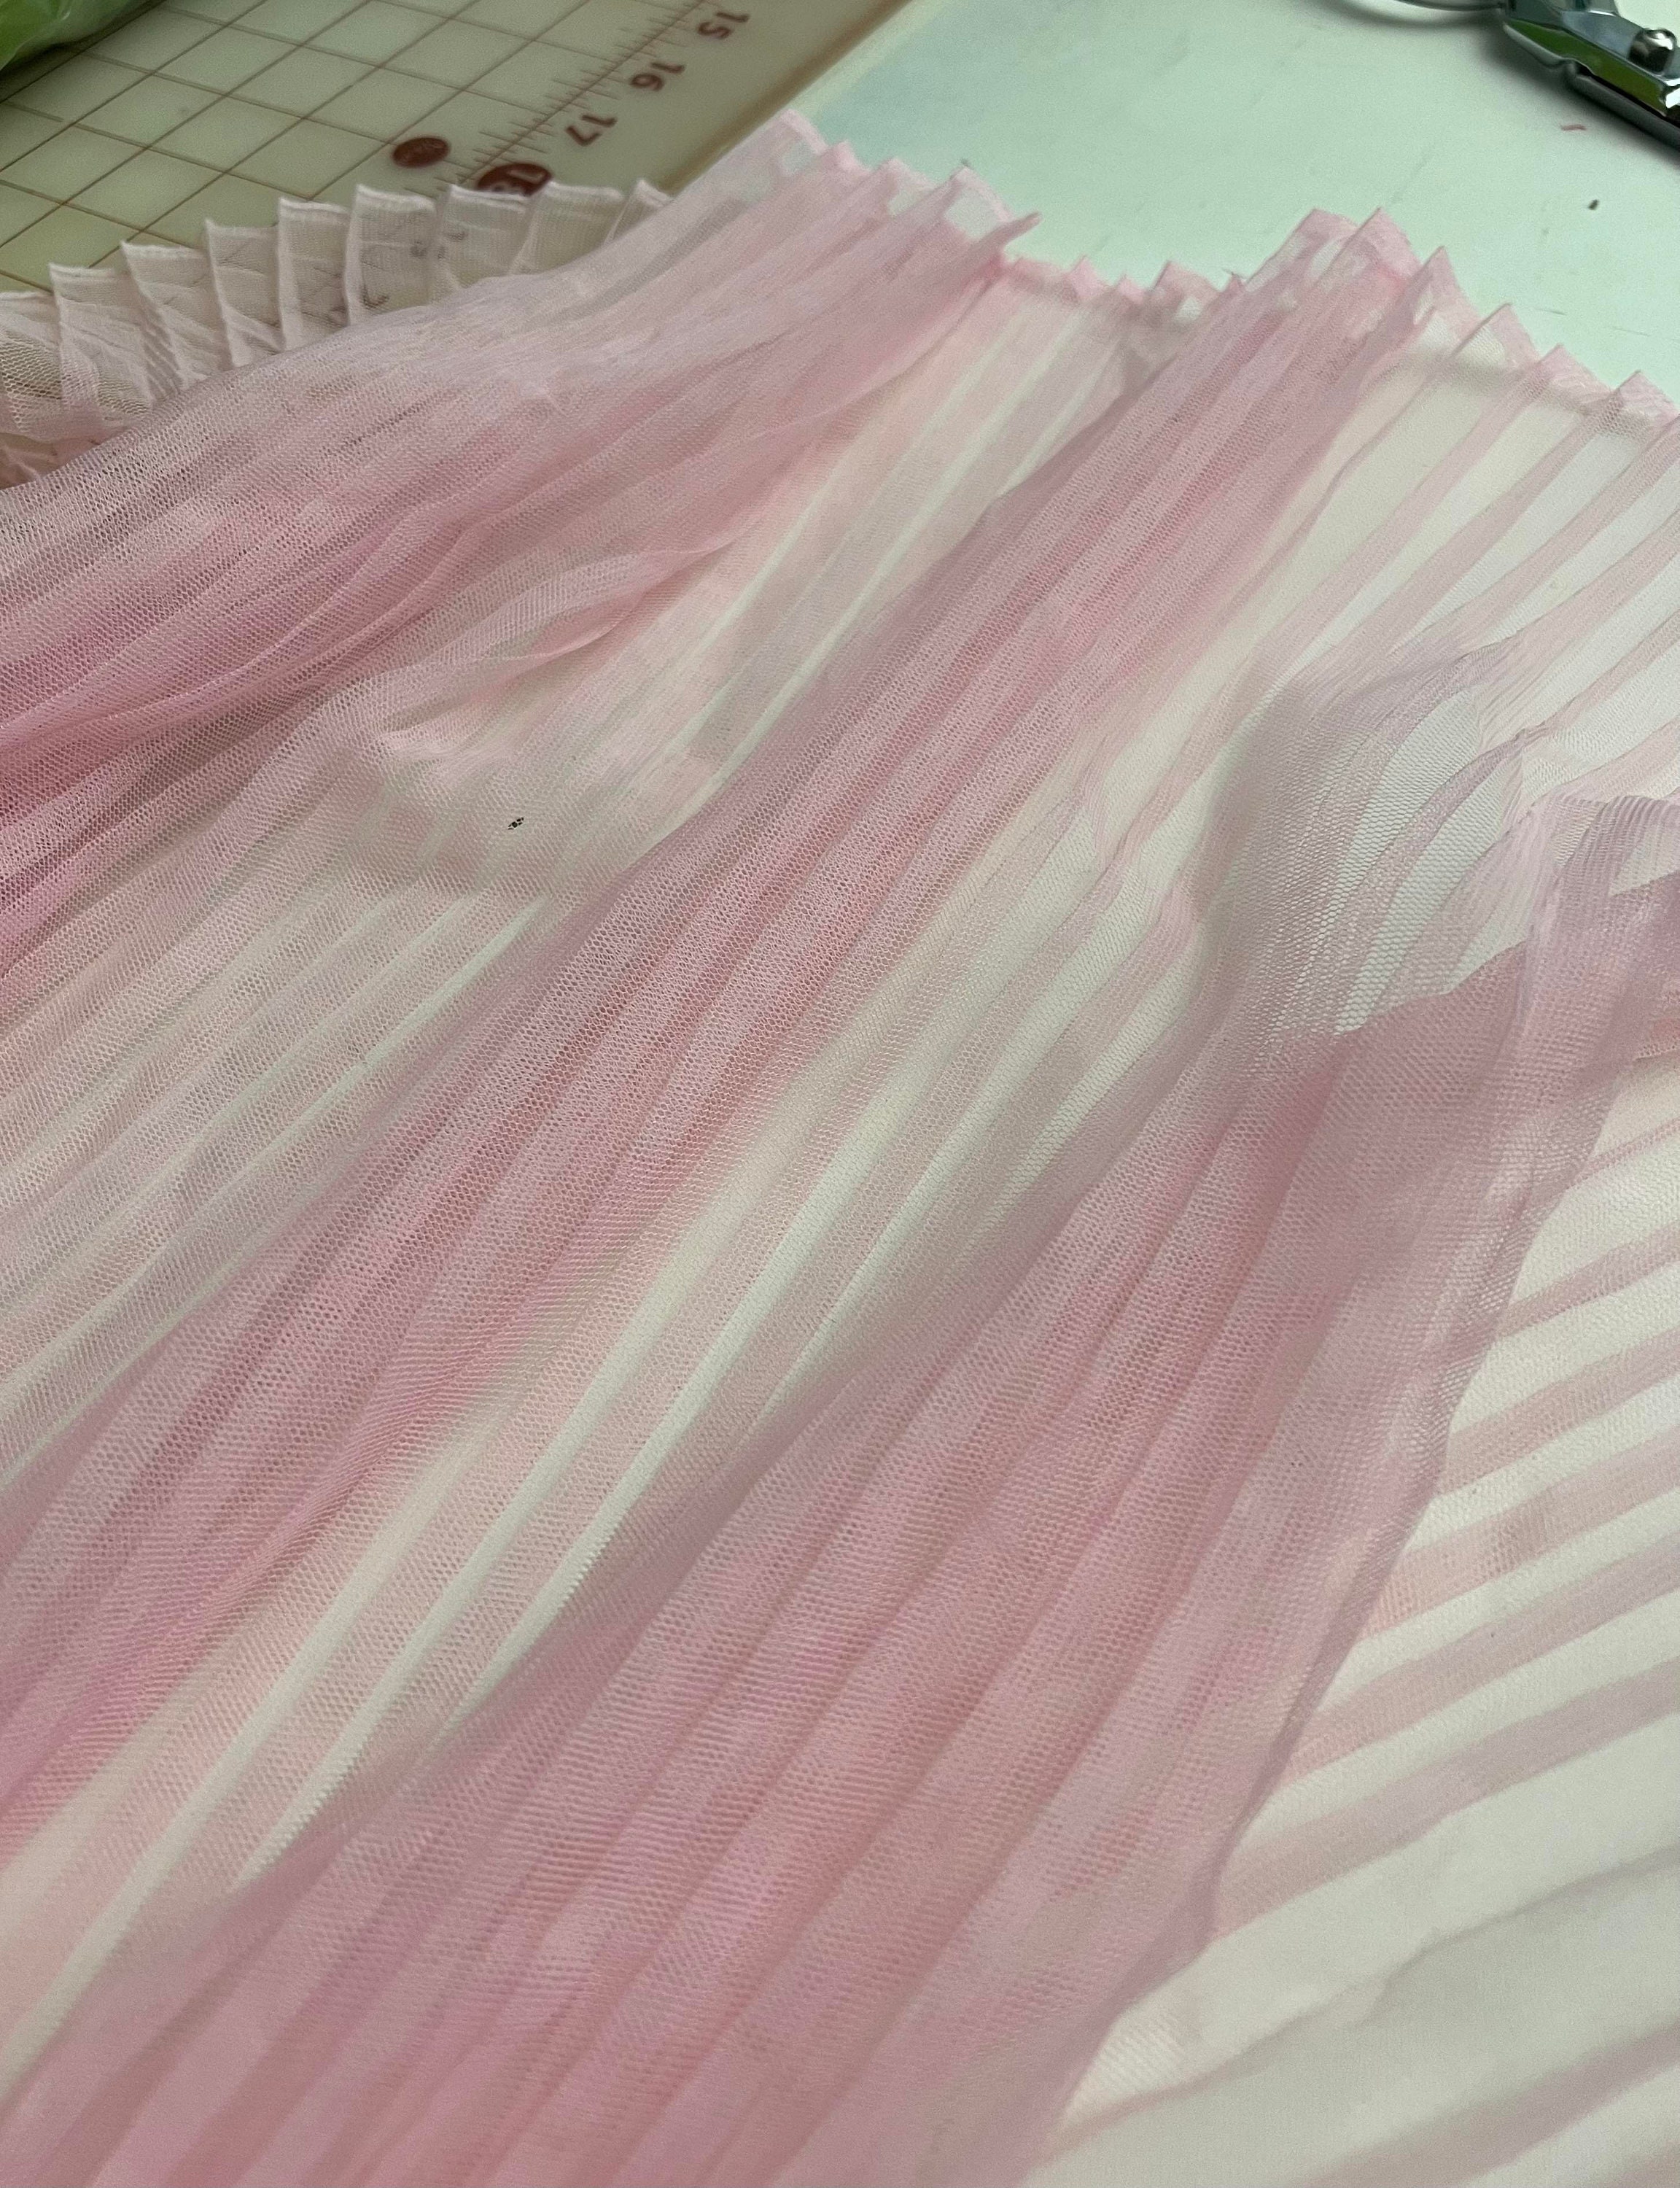 Dusty rose soft luxury tulle Wedding tulle material Tutu fabric Tulle net  fabric Tulle party decoration - 300 сm width #28